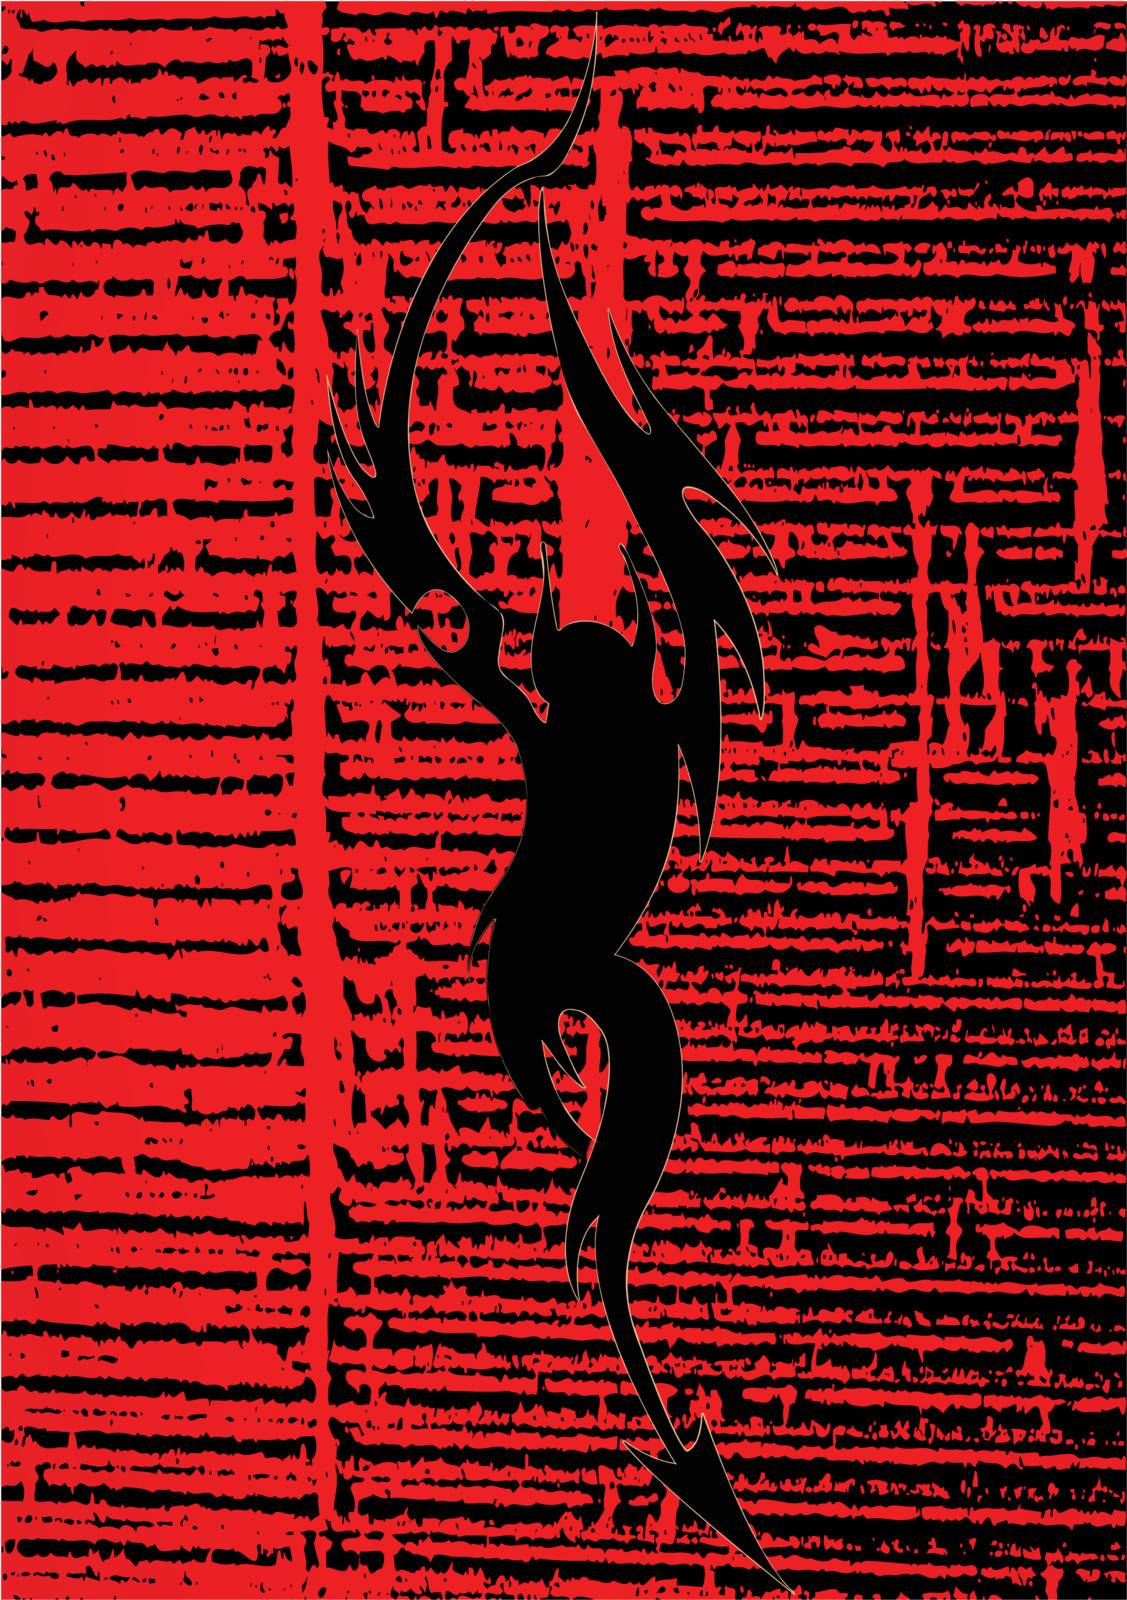 on the abstract red background devil drawing